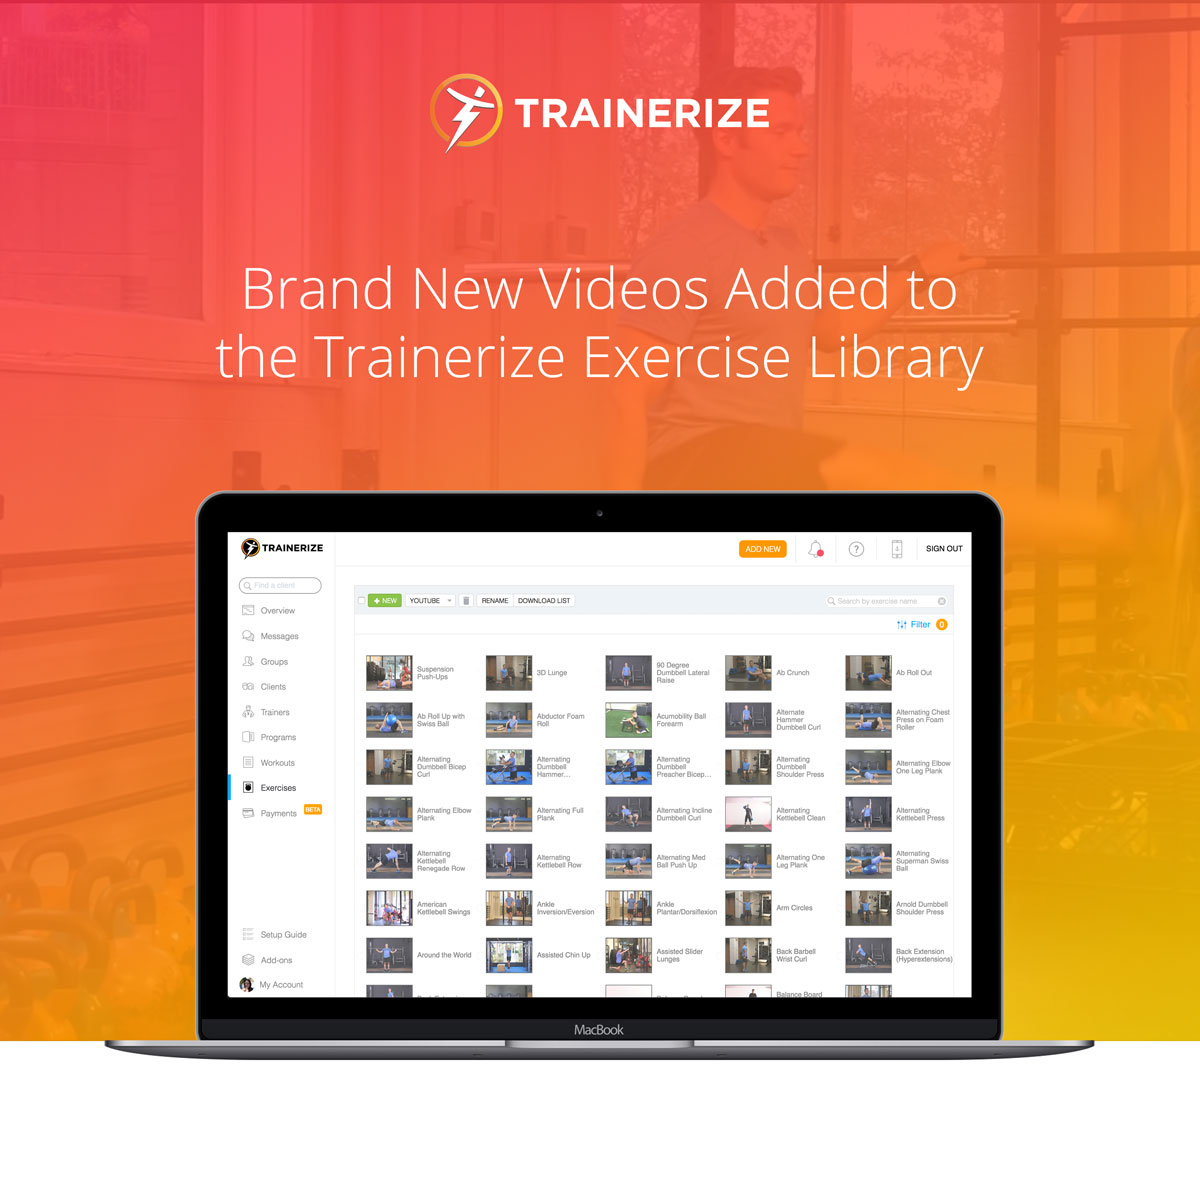 Trainerize Update | New Year, New Exercise Videos: Brand New Videos Added to the Trainerize Exercise Library